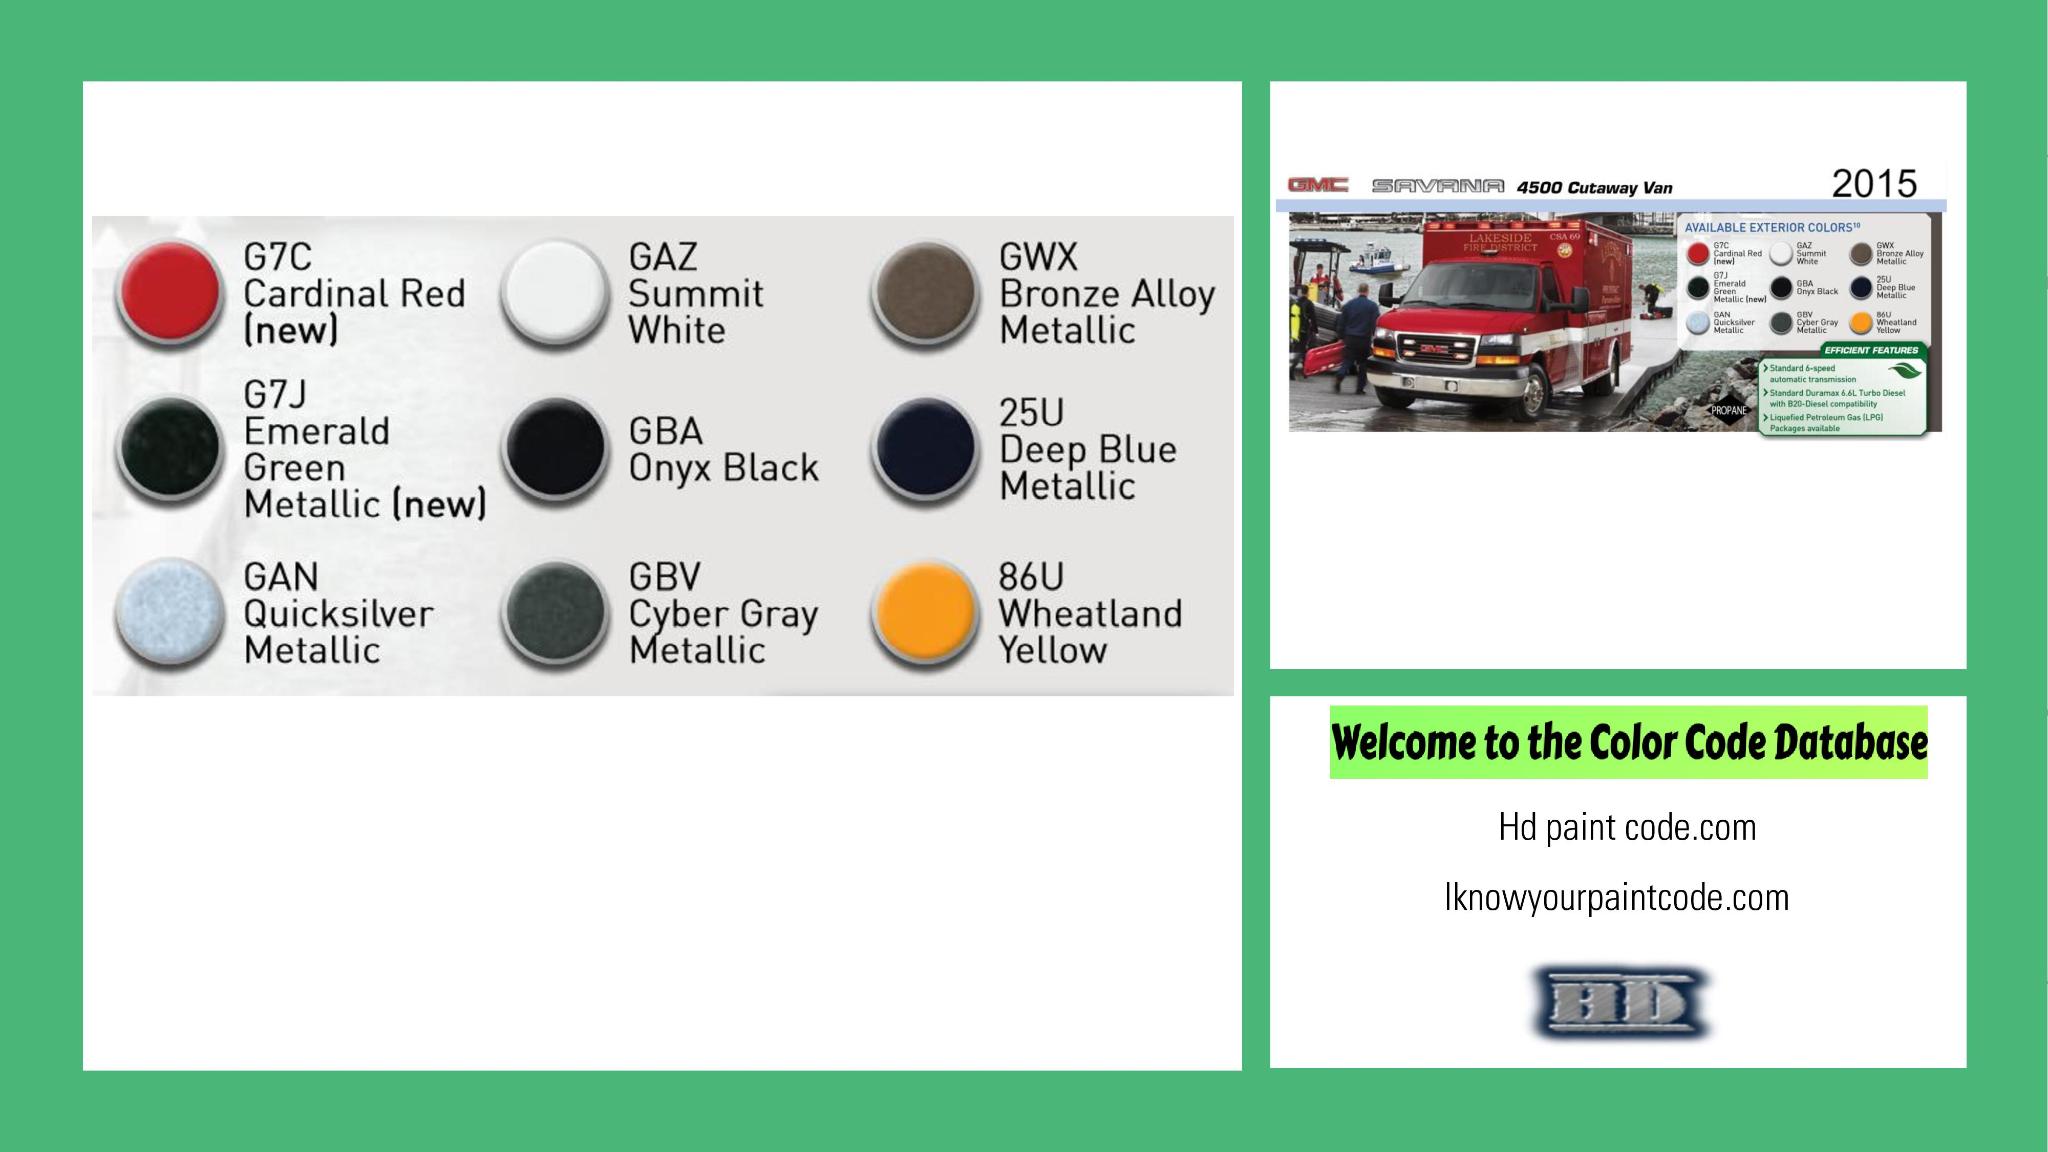 paint codes, paint swatches and vehicle example of the 2015 GM vehicle